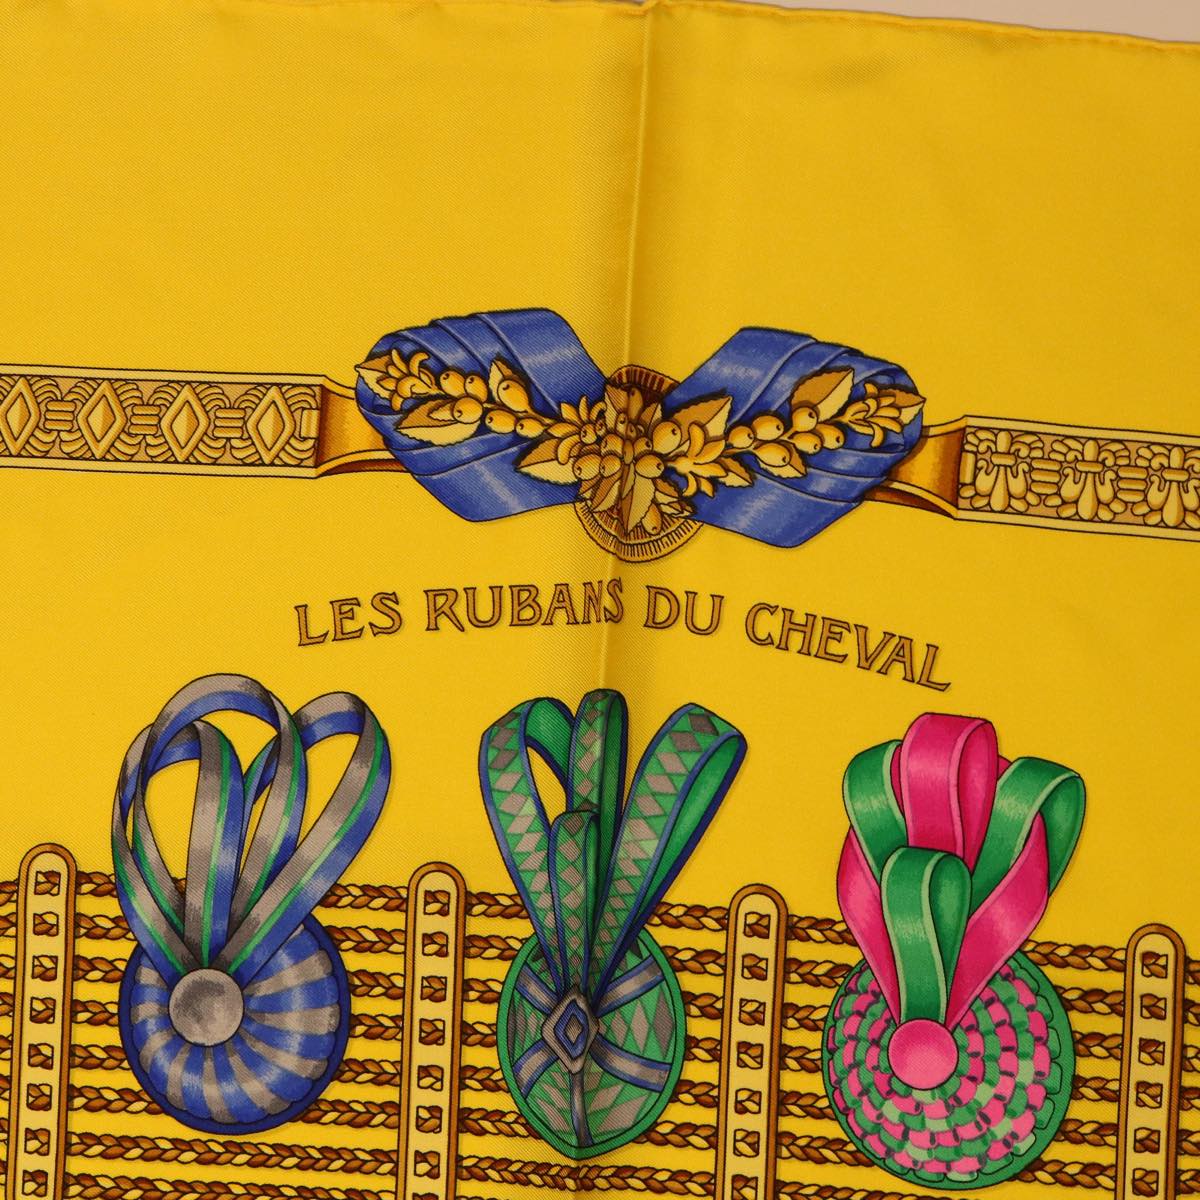 HERMES Carre 90 Scarf ”LES RUBANS DU CHEVAL” Silk Yellow Auth bs7310